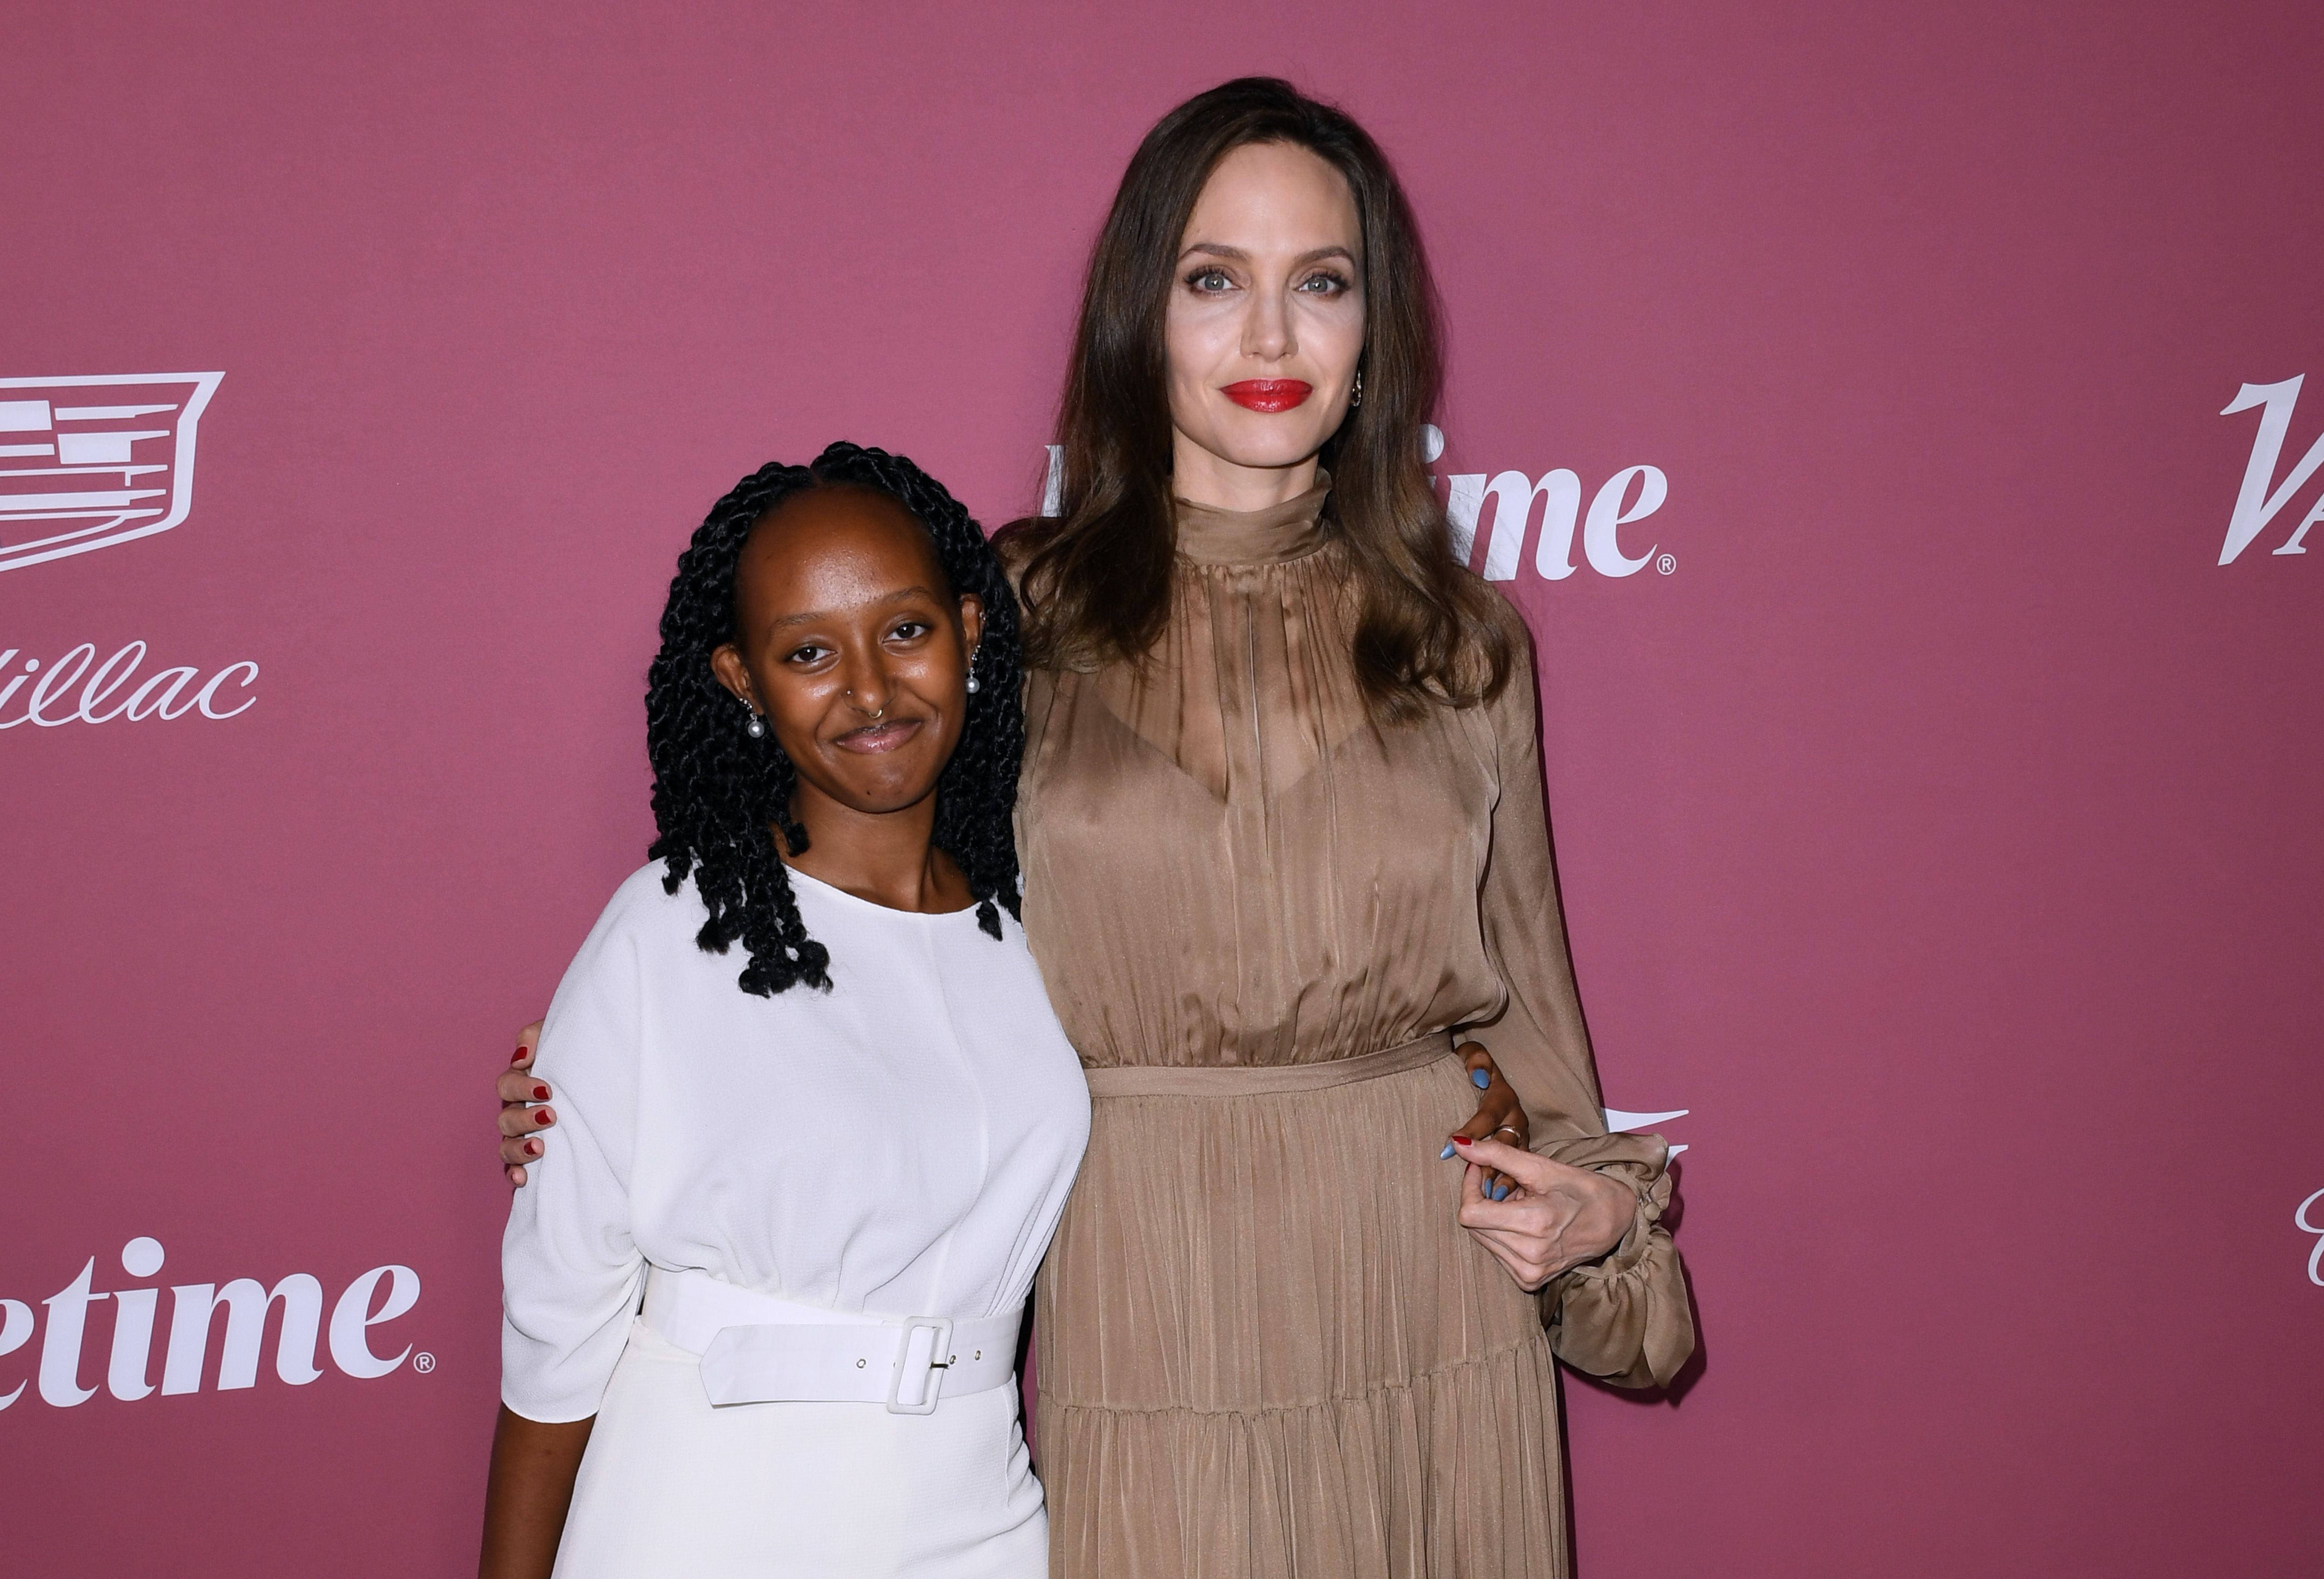 Zahara Jolie-Pitt and Angelina Jolie at Variety's Power of Women event on September 30, 2021, in Beverly Hills, California | Source: Getty Images